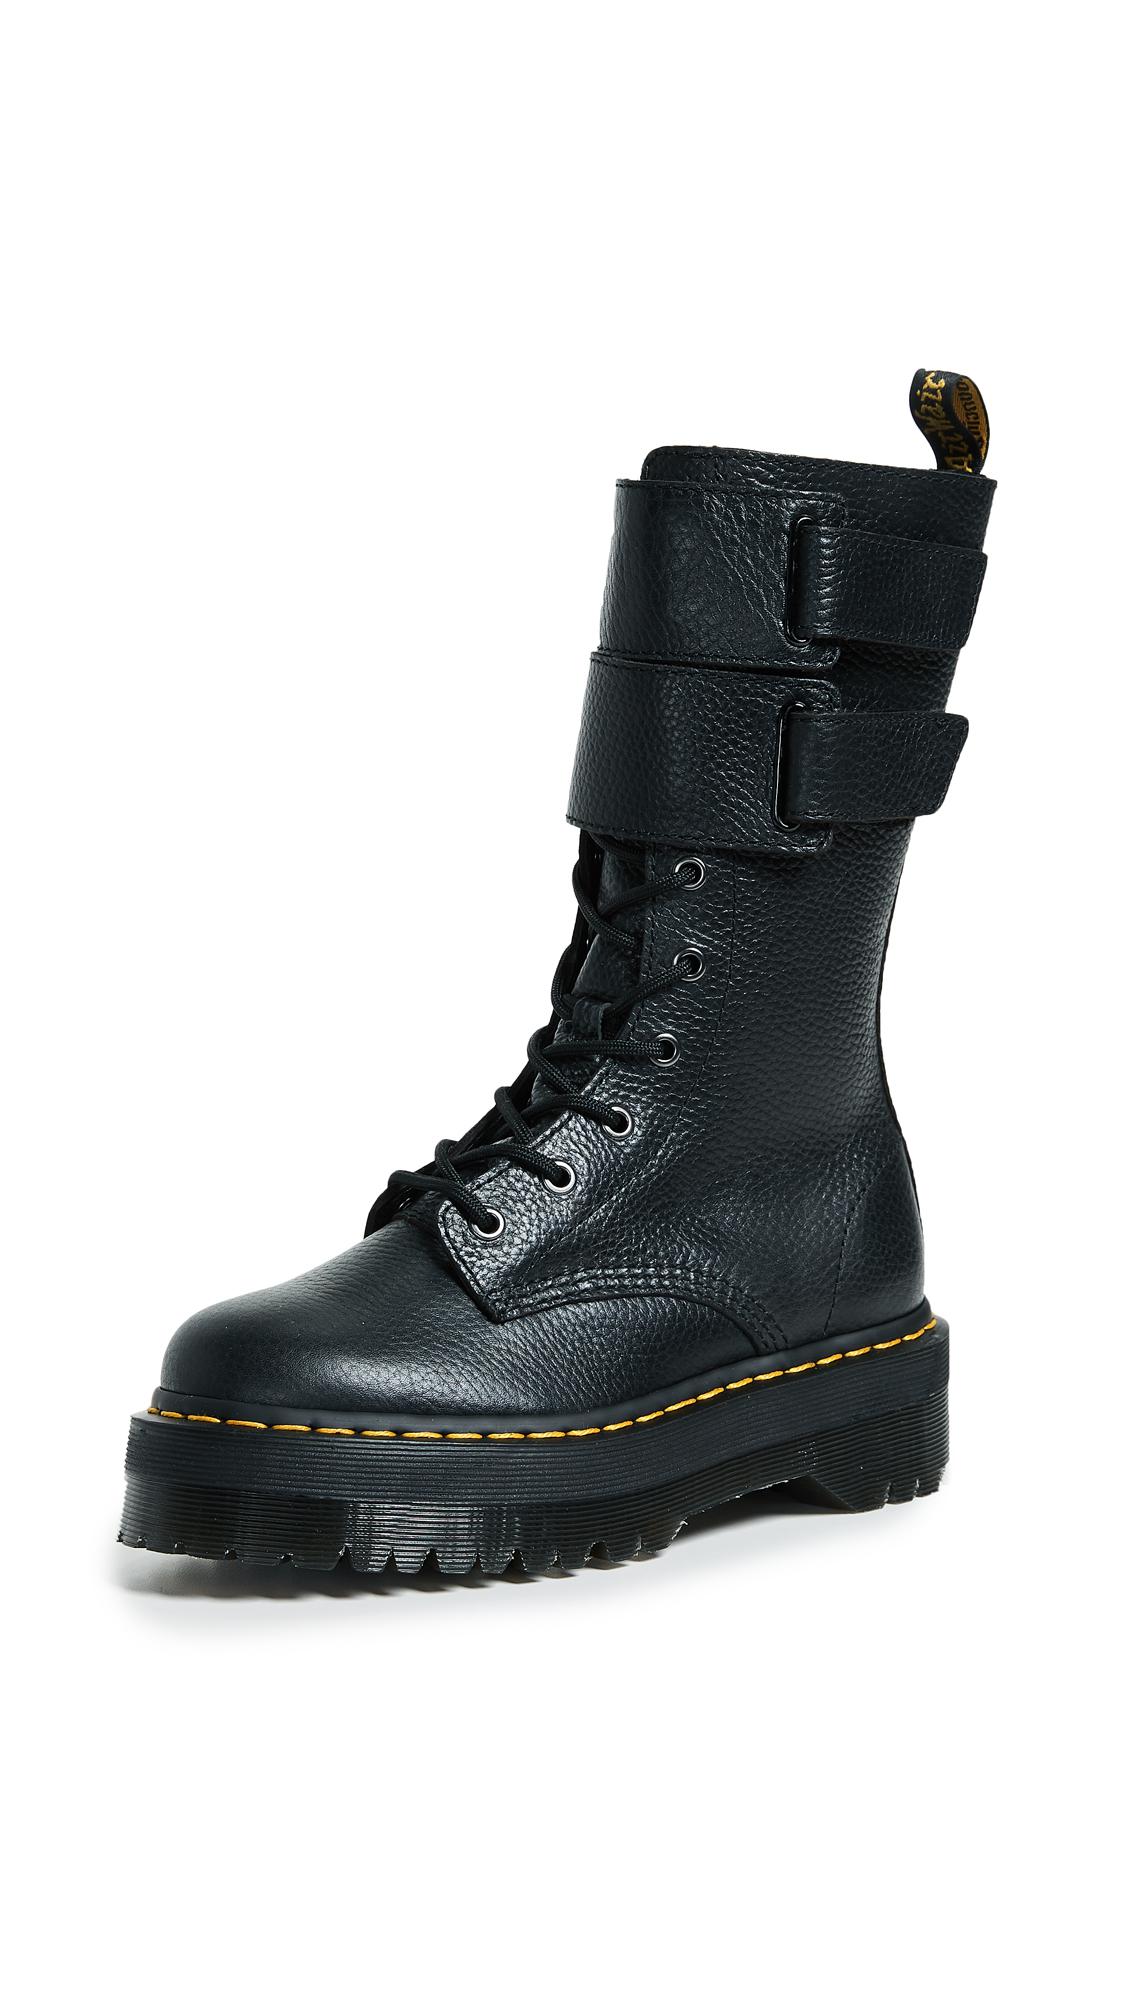 Dr. Martens Jagger 10 Eye Boots in Black | Lyst Canada